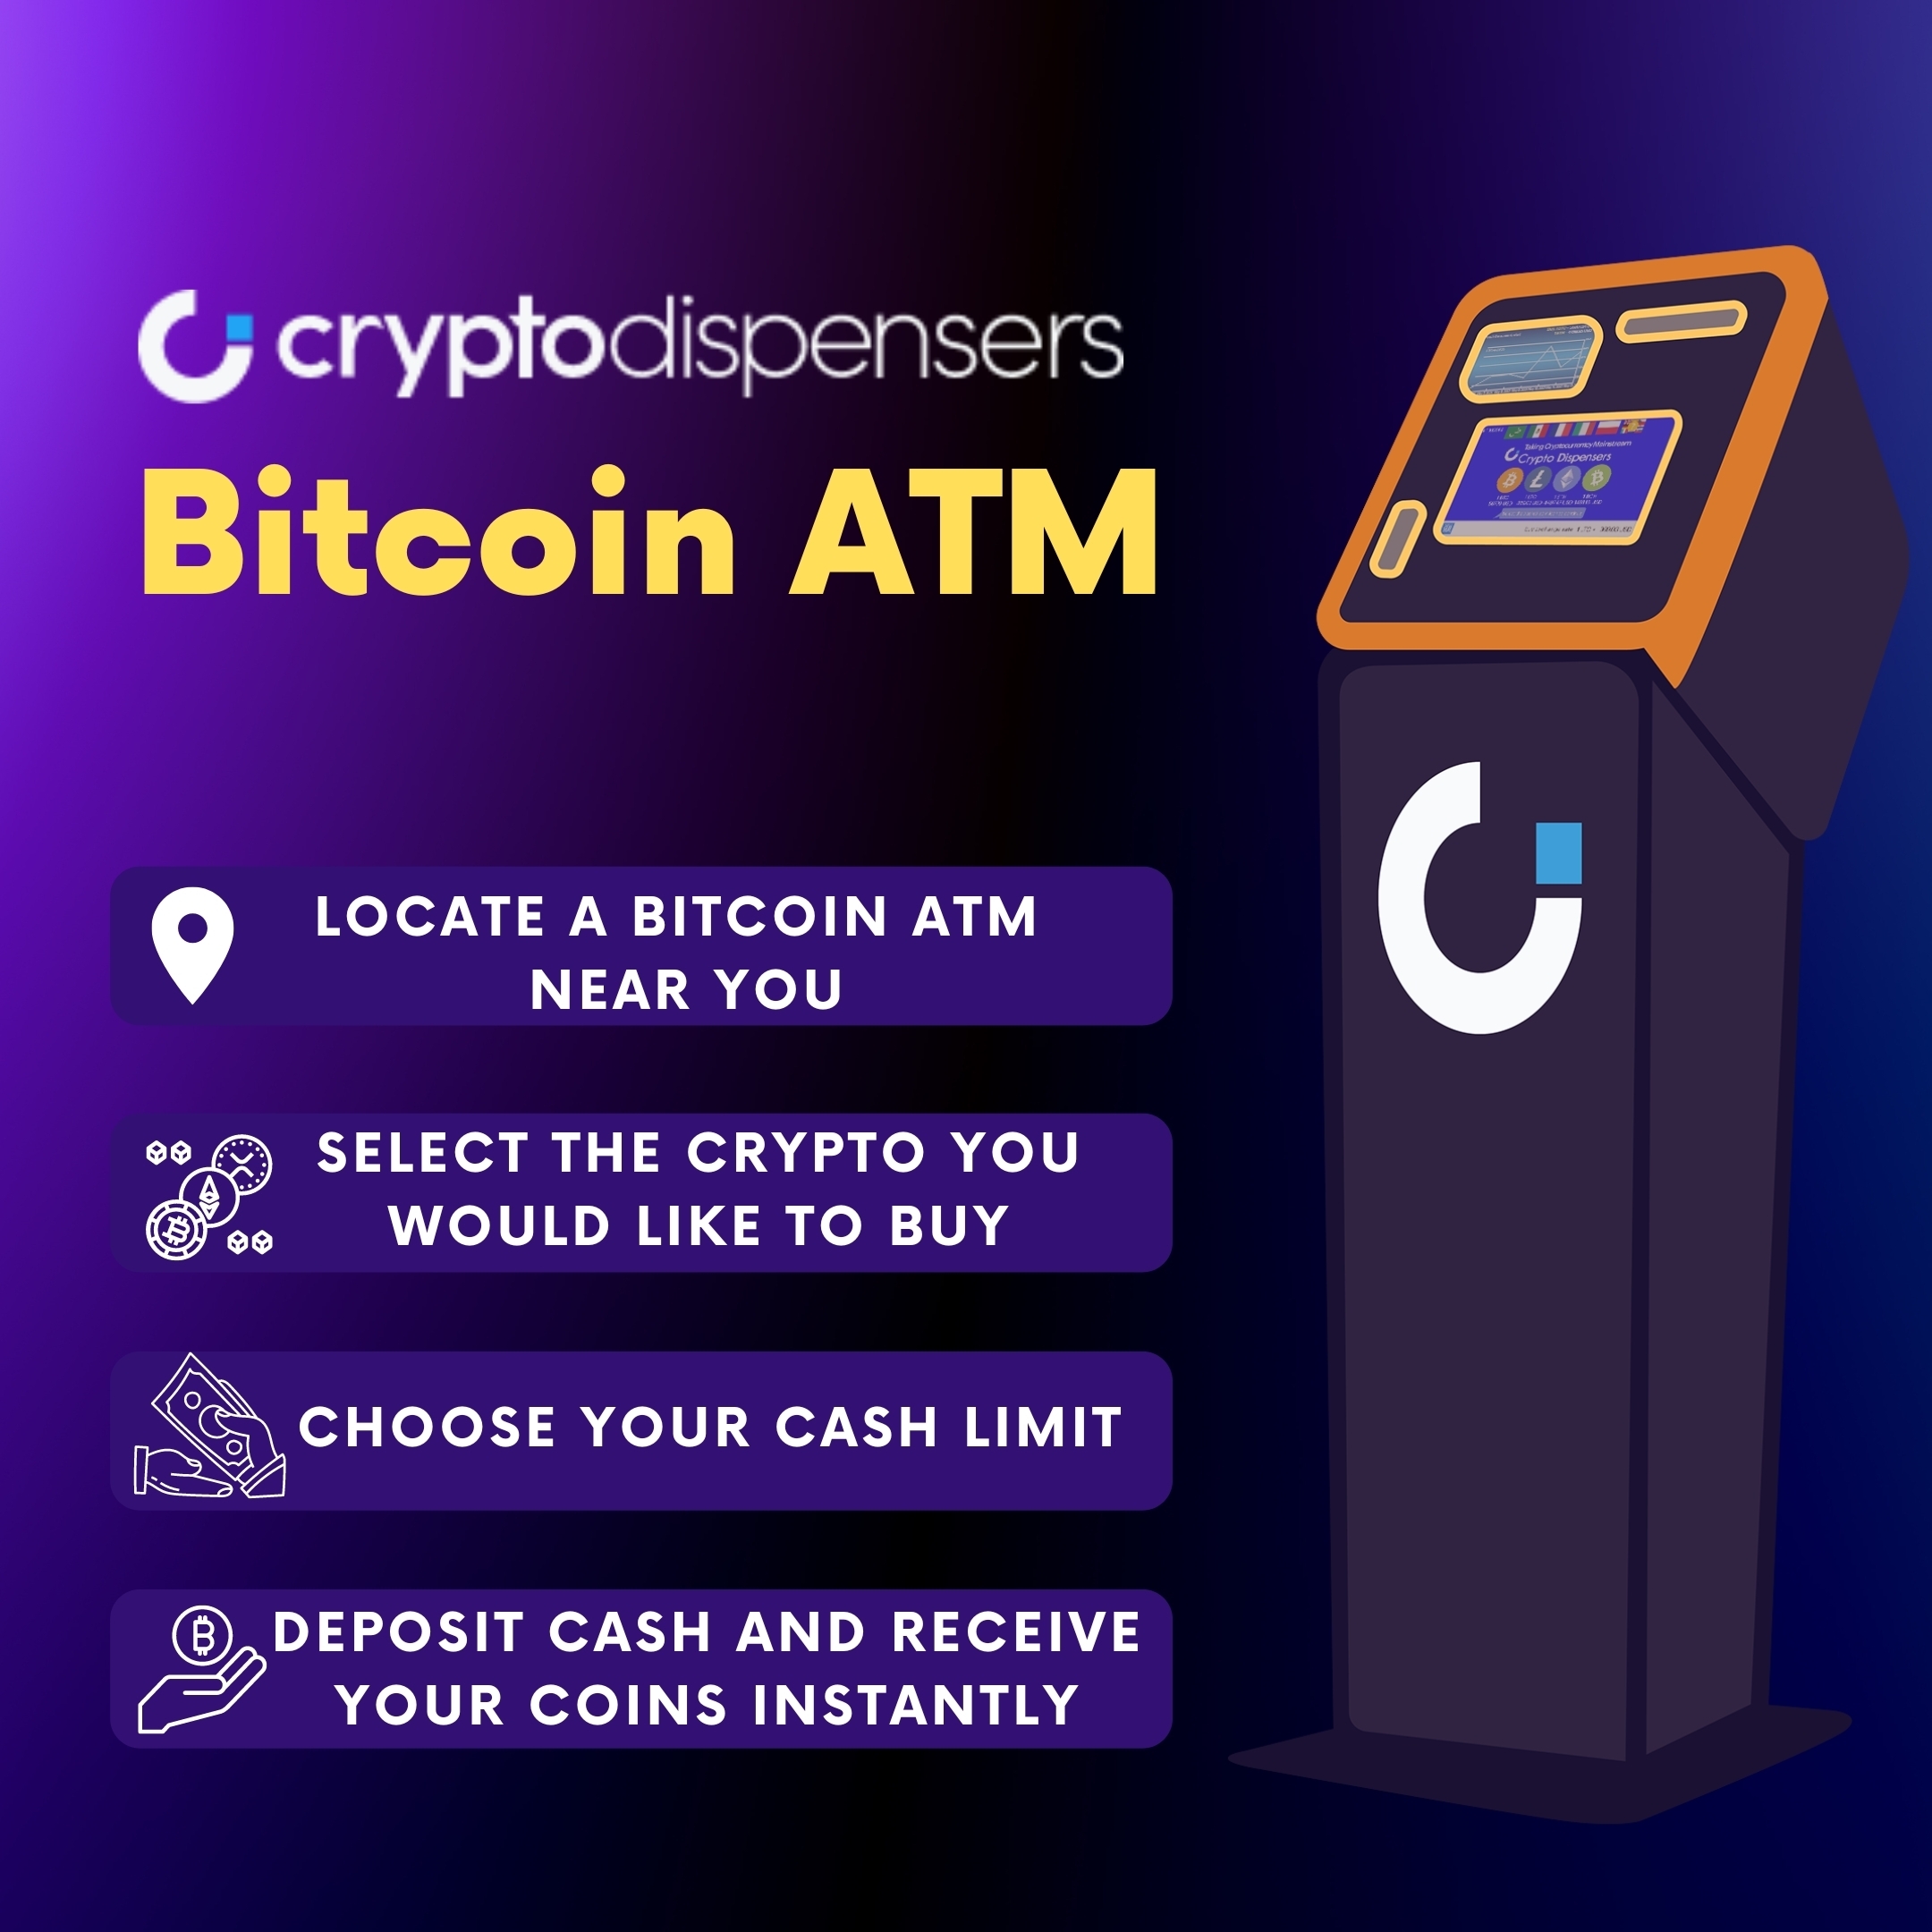 Buy Bitcoin in Florida at Crypto Dispensers Bitcoin ATM inside Altamonte Mall from Crypto Dispensers Bitcoin ATMs